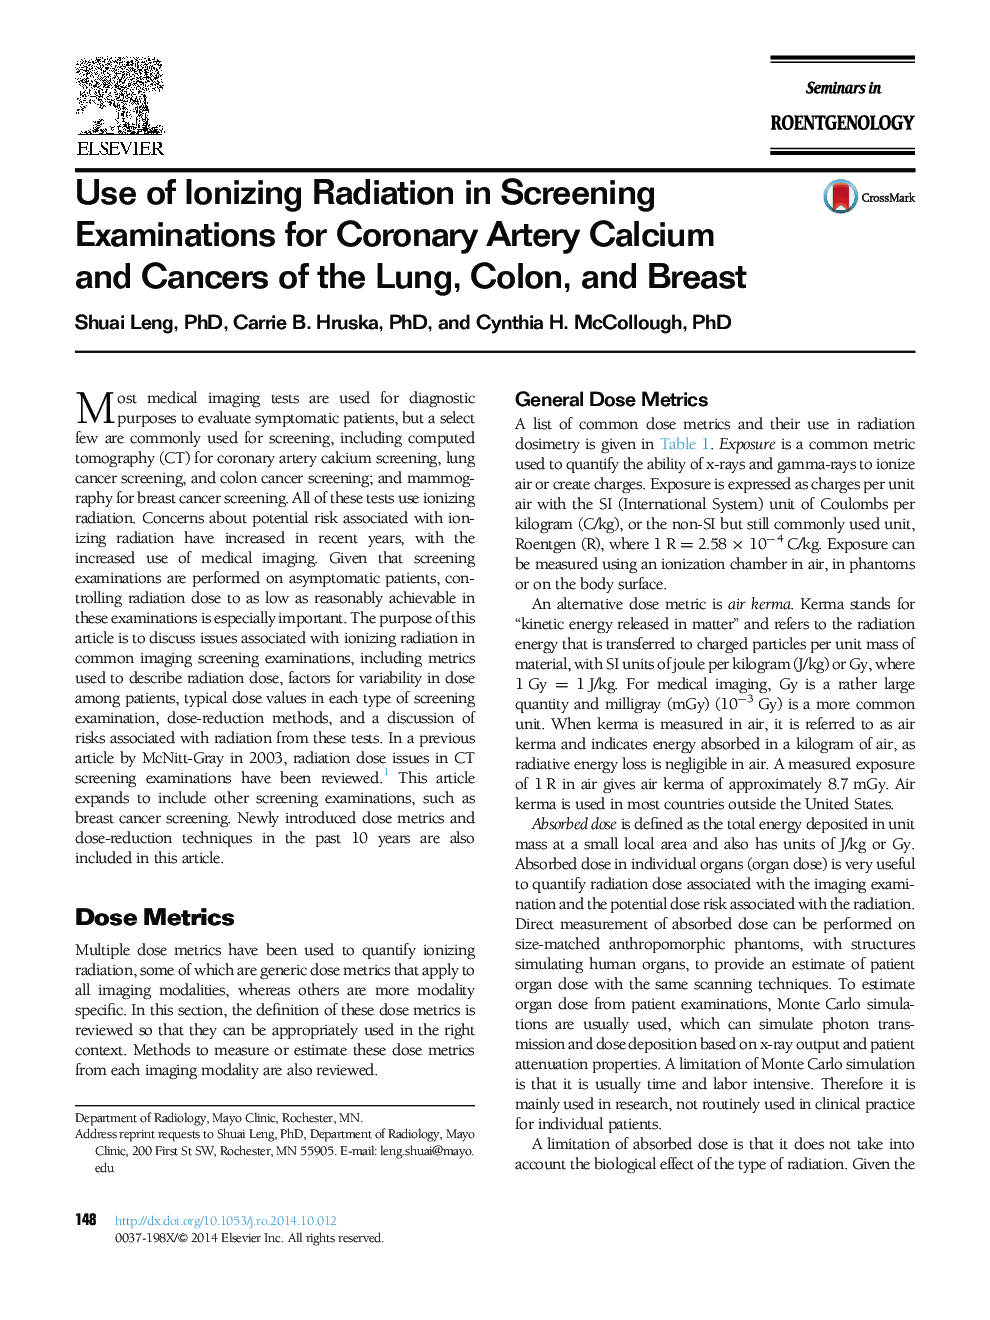 Use of Ionizing Radiation in Screening Examinations for Coronary Artery Calcium and Cancers of the Lung, Colon, and Breast